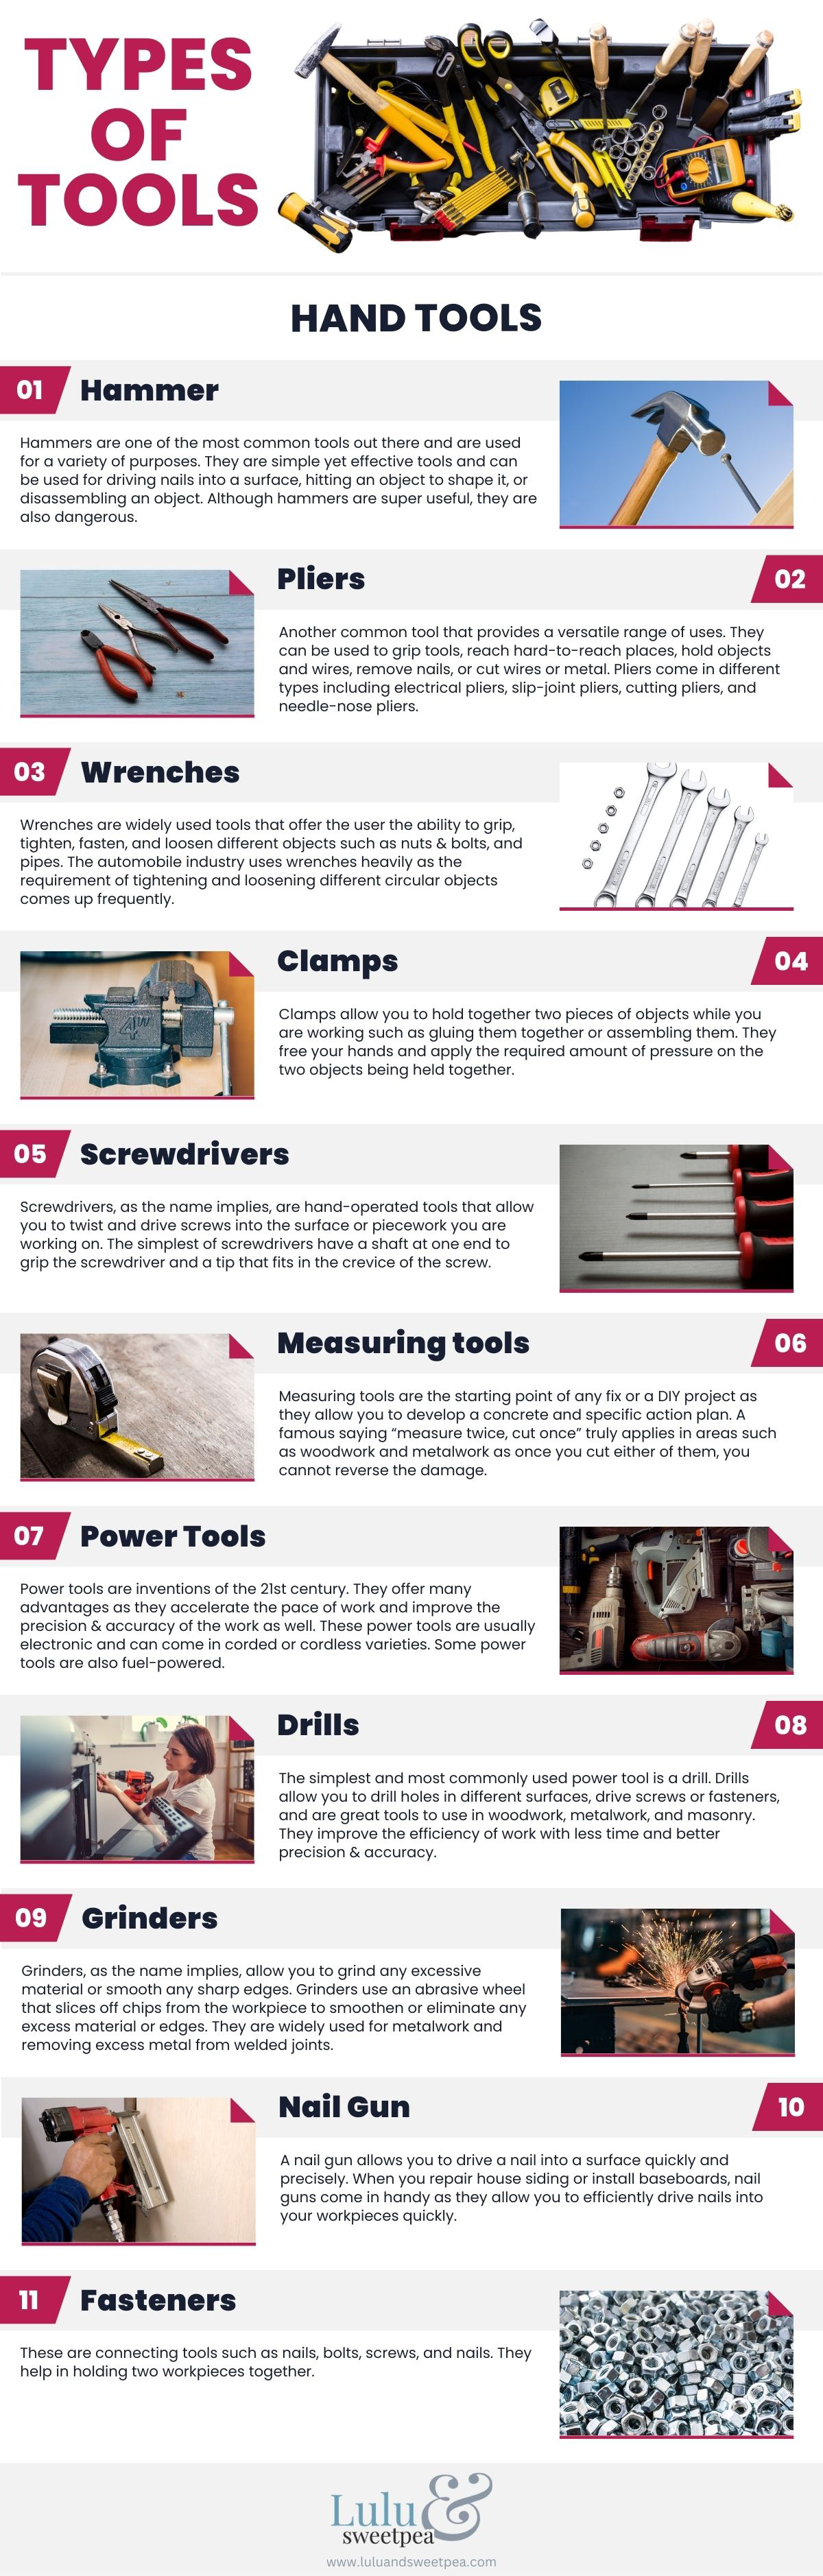 types of tools explained